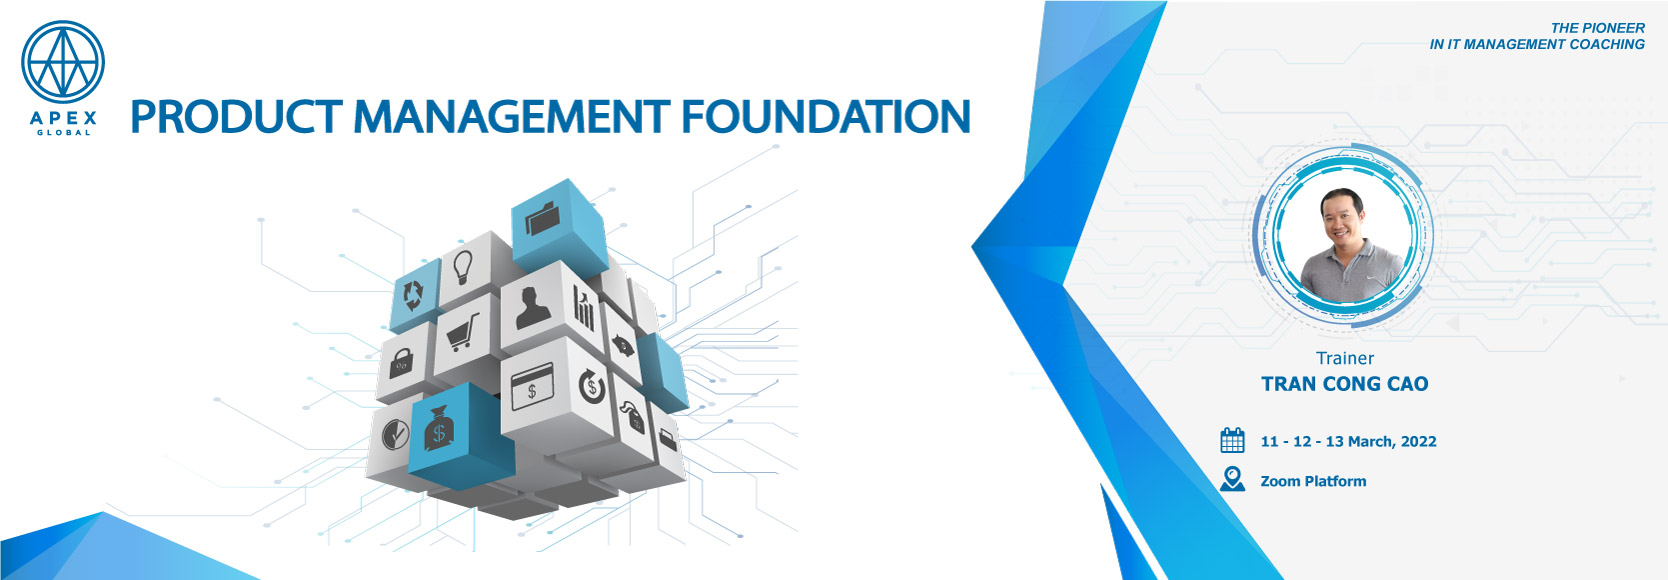 Product-management-foundation-apex-global